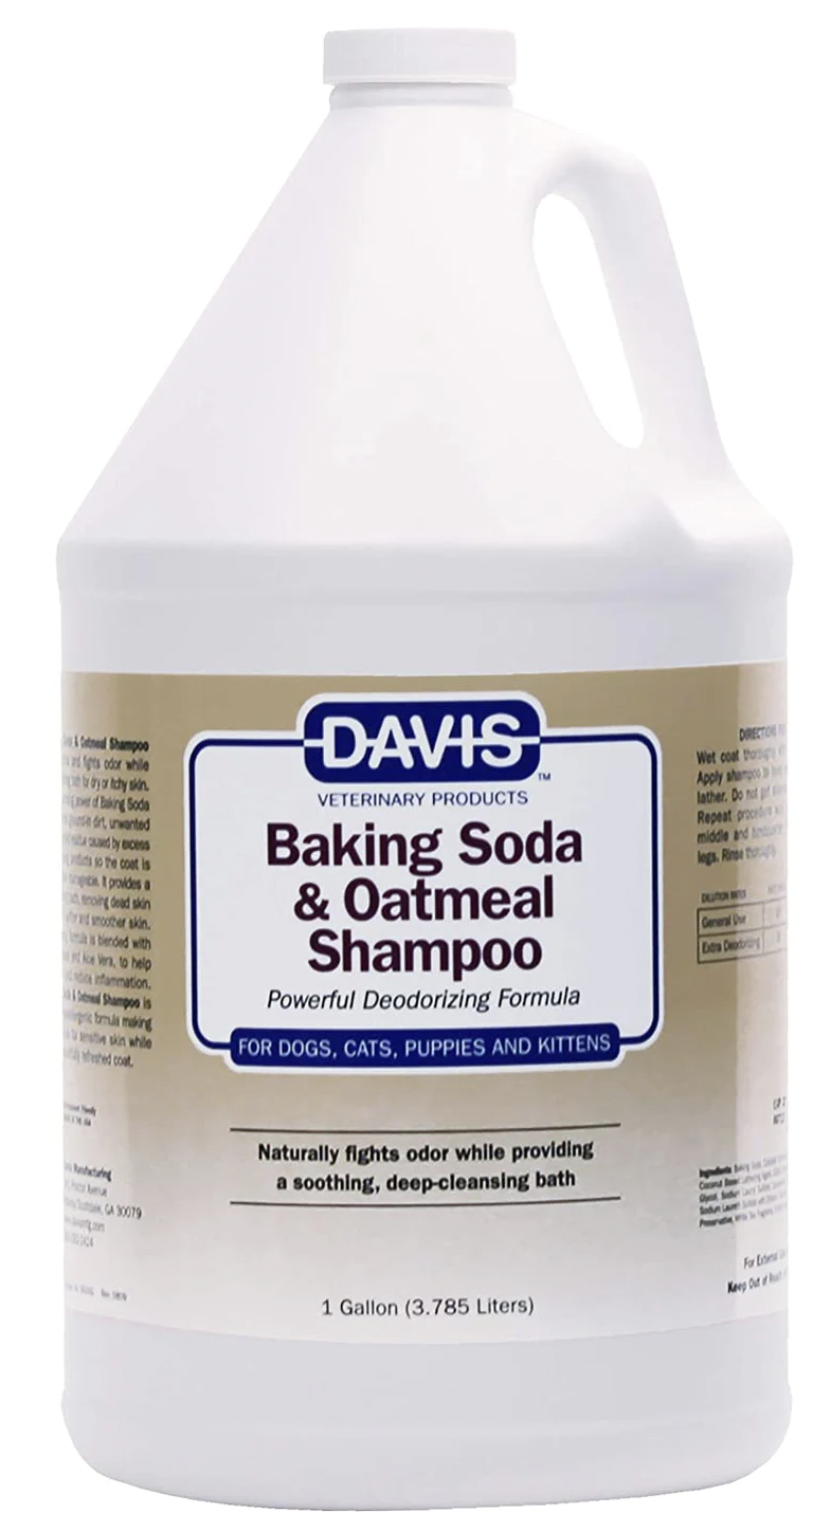 One Gallon White bottle filled with Davis Baking Soda And Oatmeal Shampoo that is good for Deodorizing 